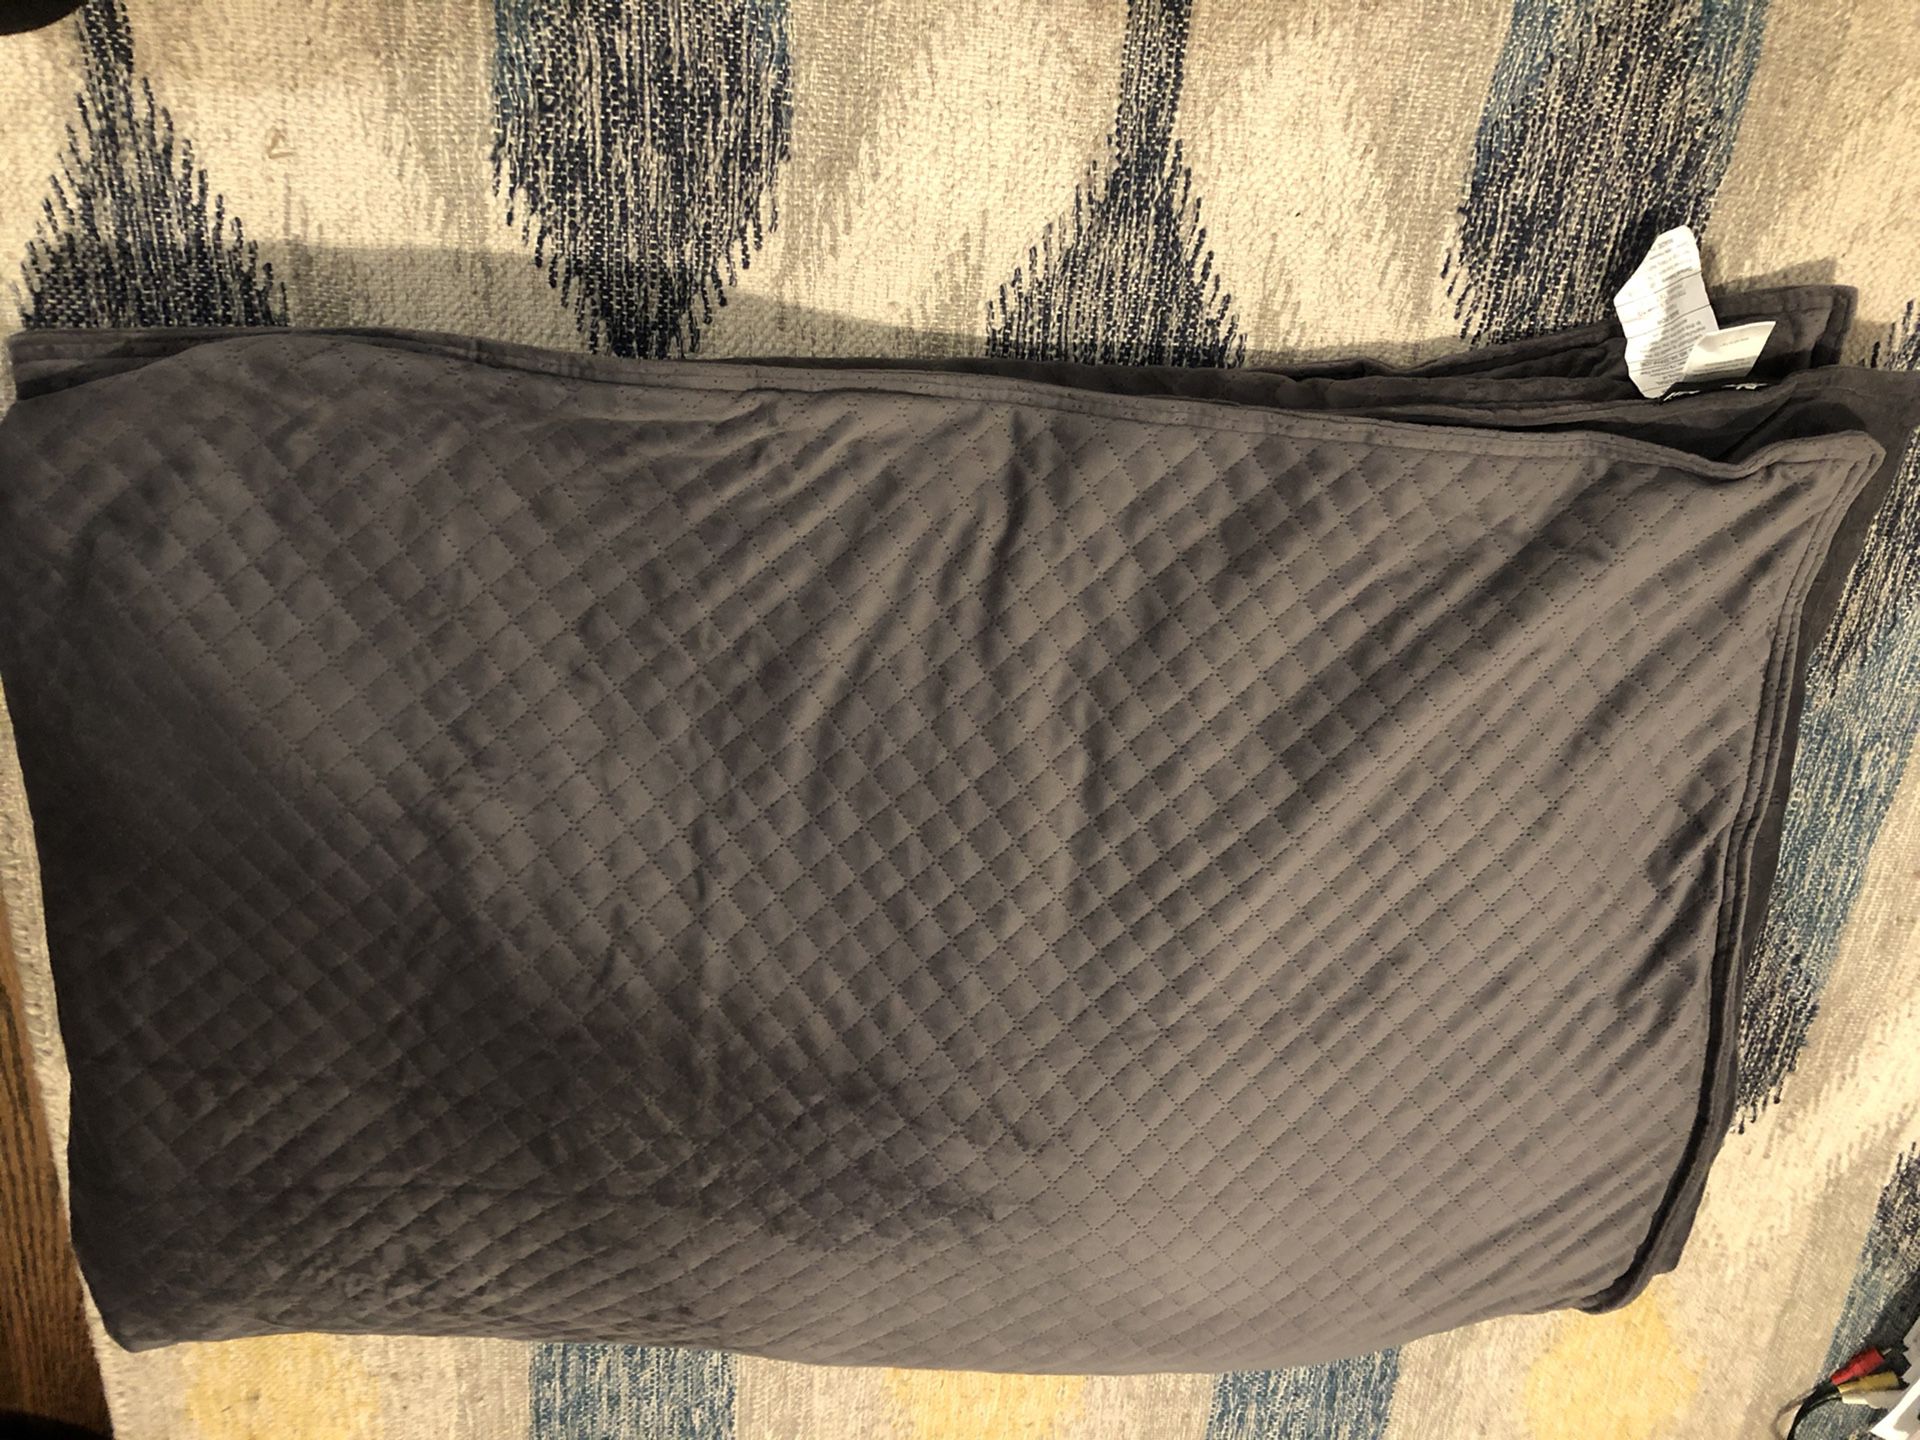 BlanQuil weighted blanket